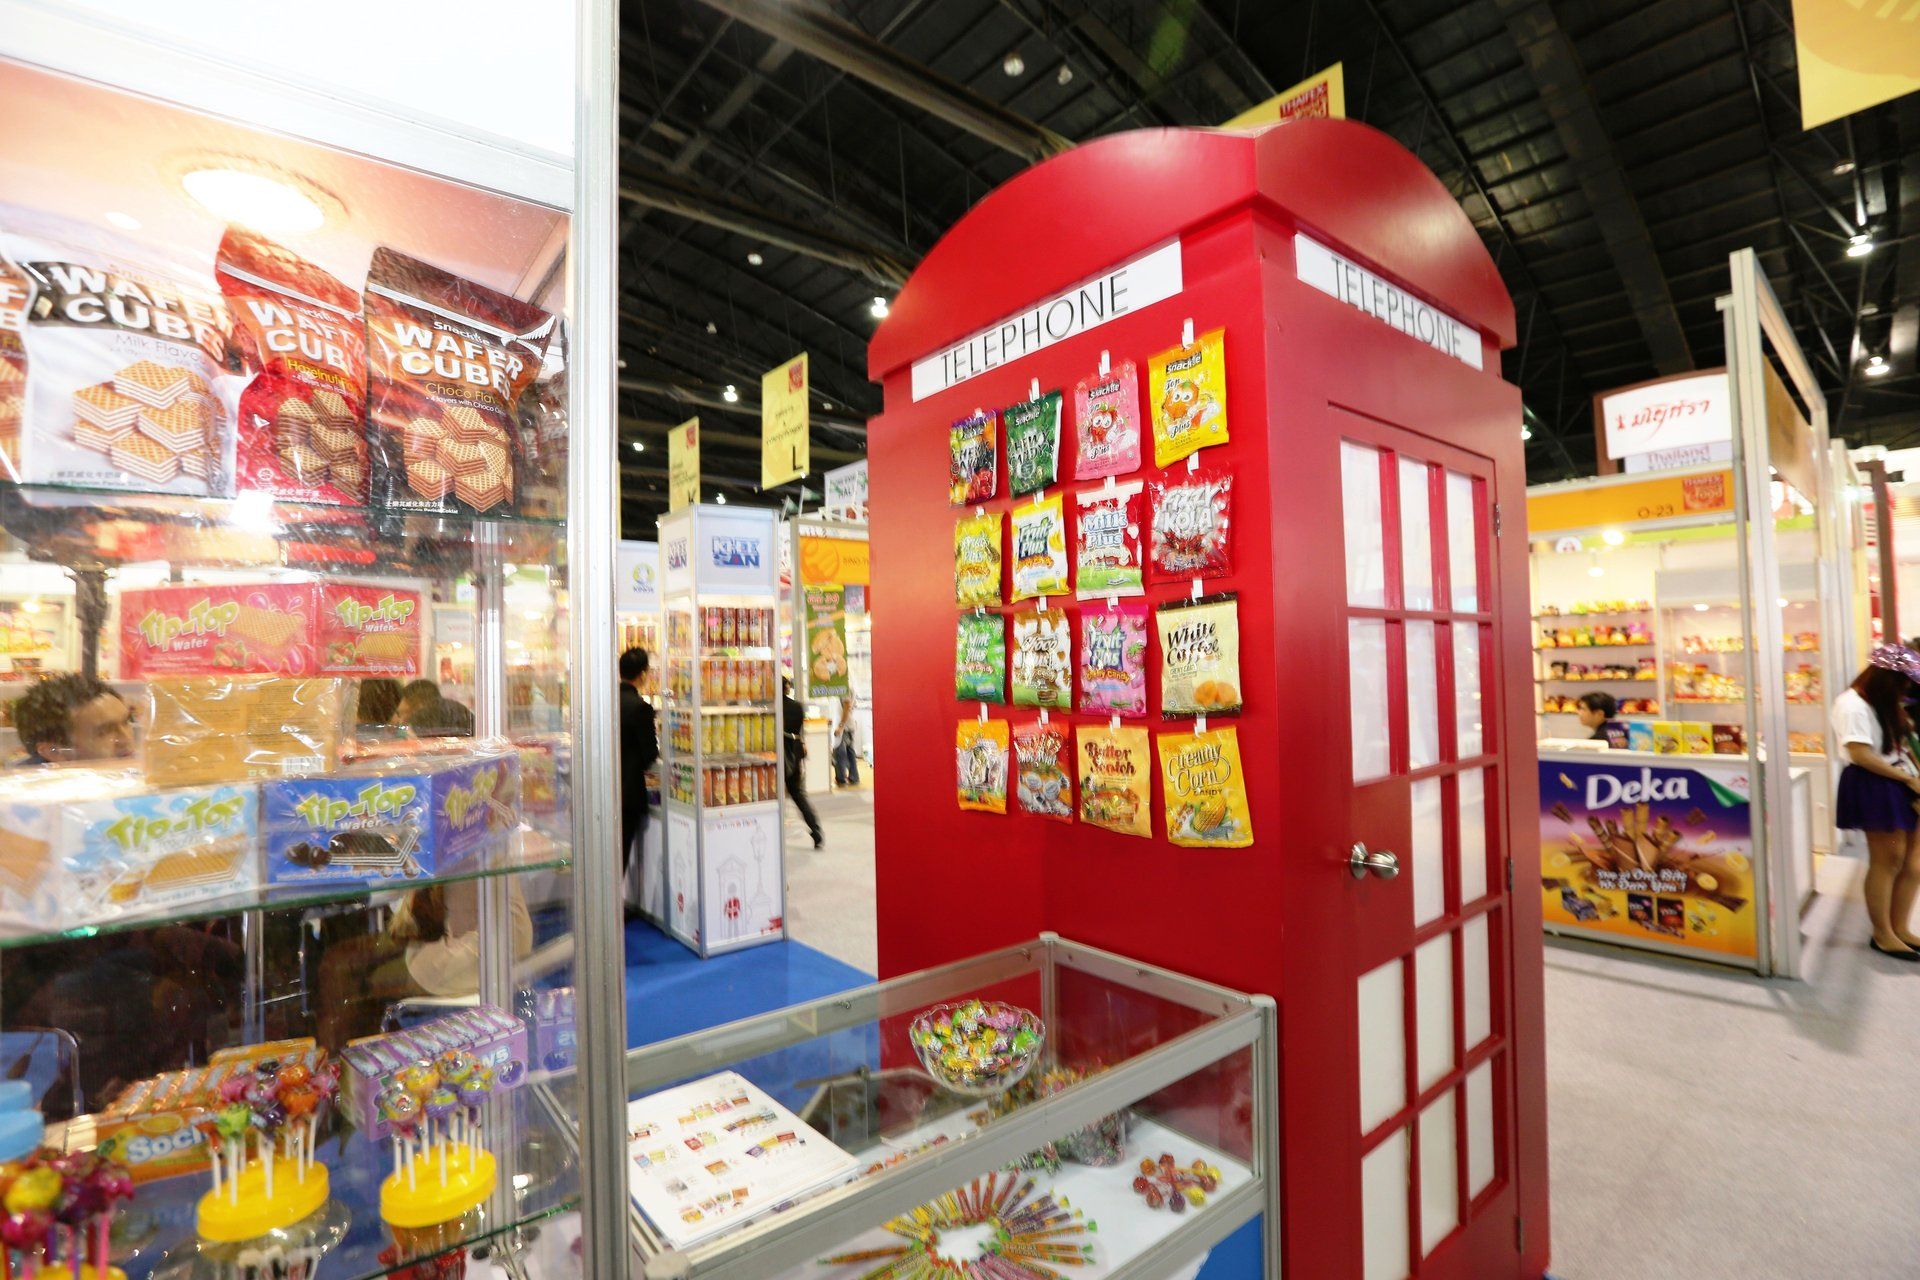 London Biscuits @ Thaifex 2015. Booth designed and built by Essential Global Fairs.